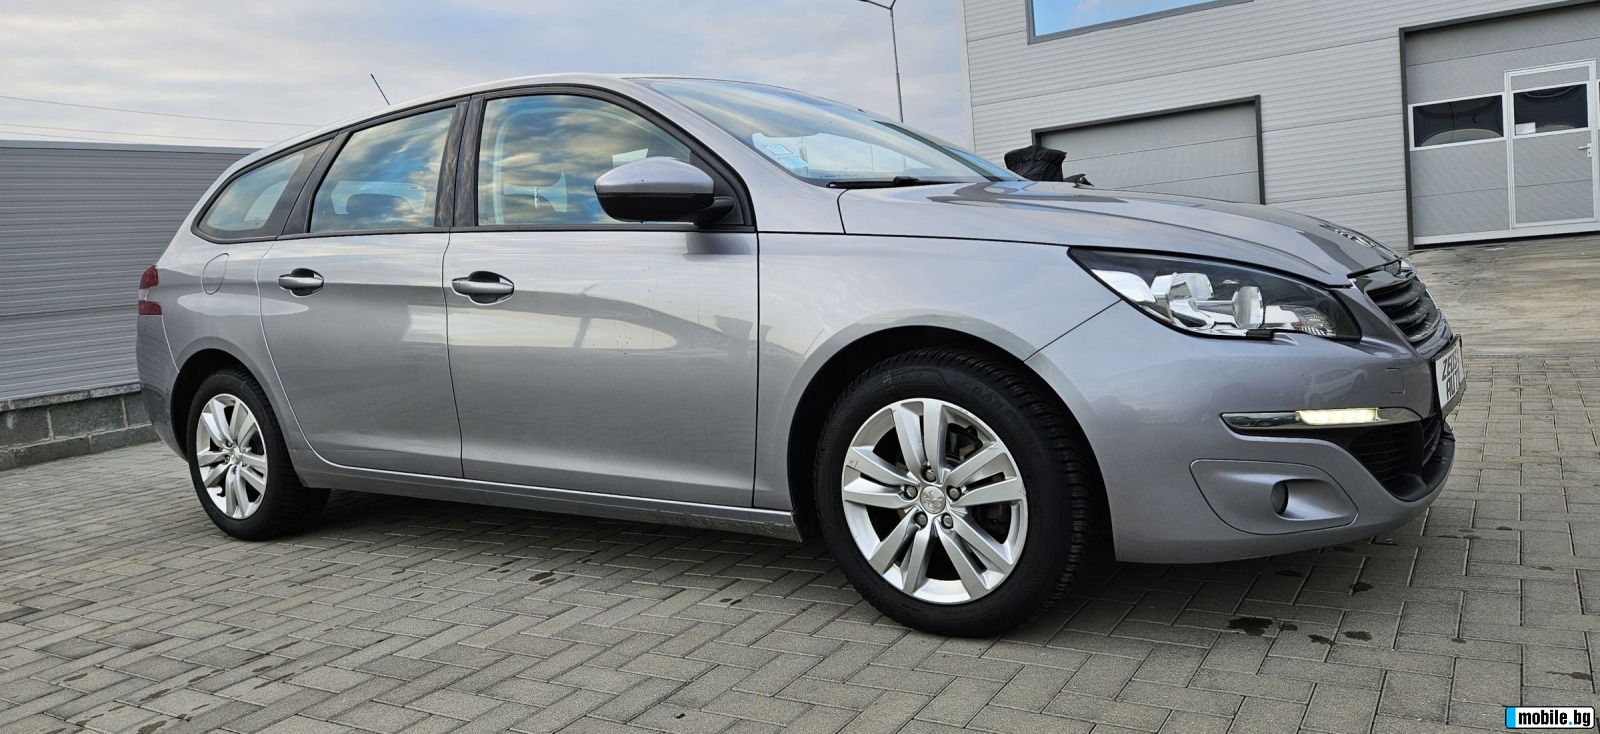 Peugeot 308 1.6 HDI Active Business | Mobile.bg   3